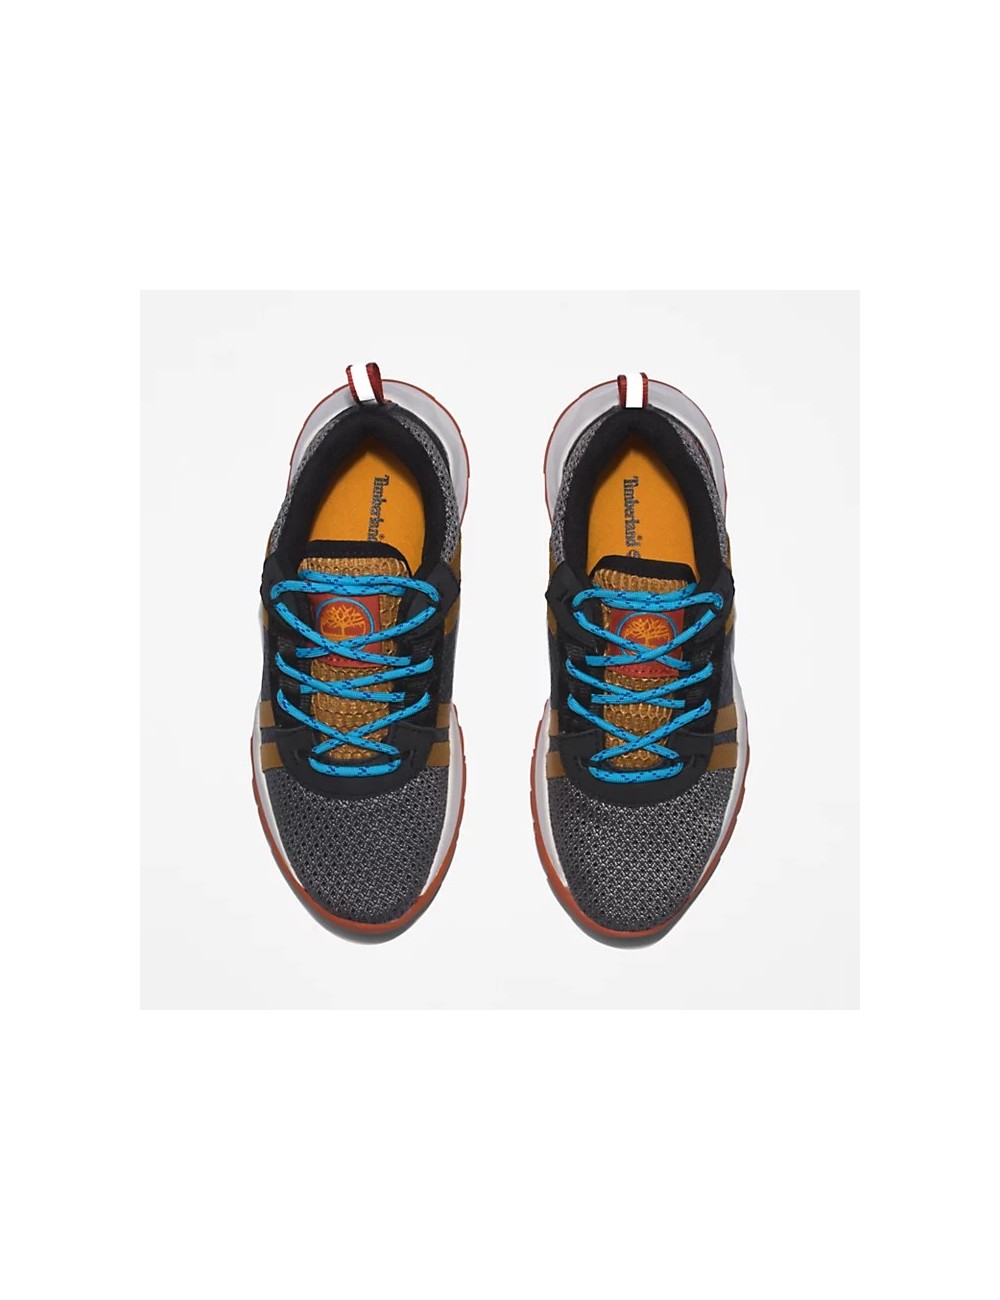 TIMBERLAND SOLAR WAVE LT LOW SNEAKERS